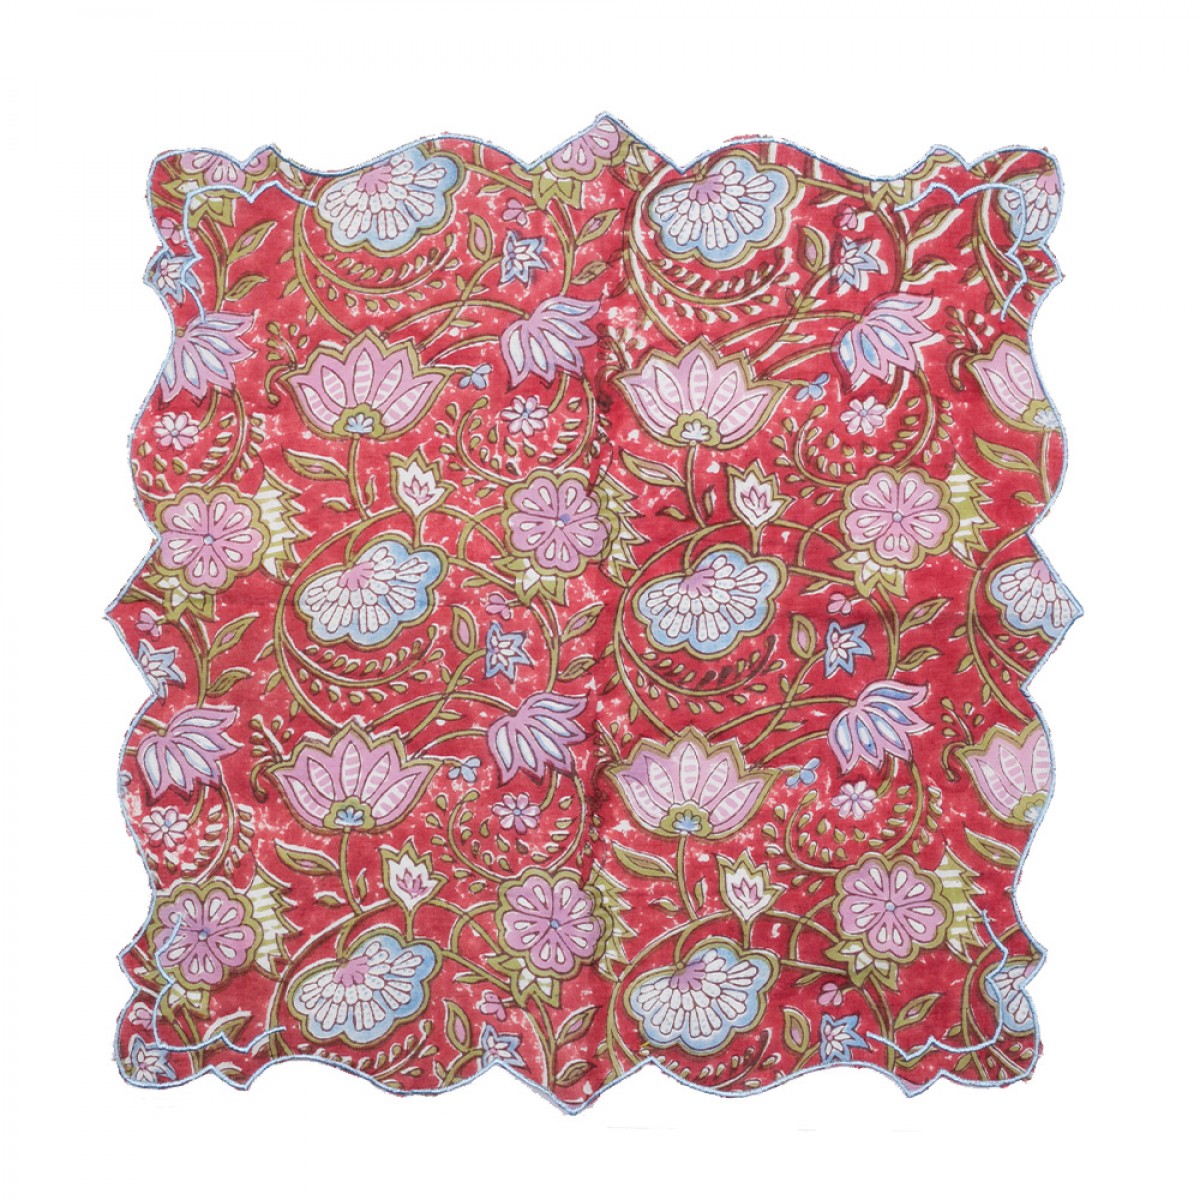 Cotton Scallop Embroidered Printed Napkin - Red (Set of 6)